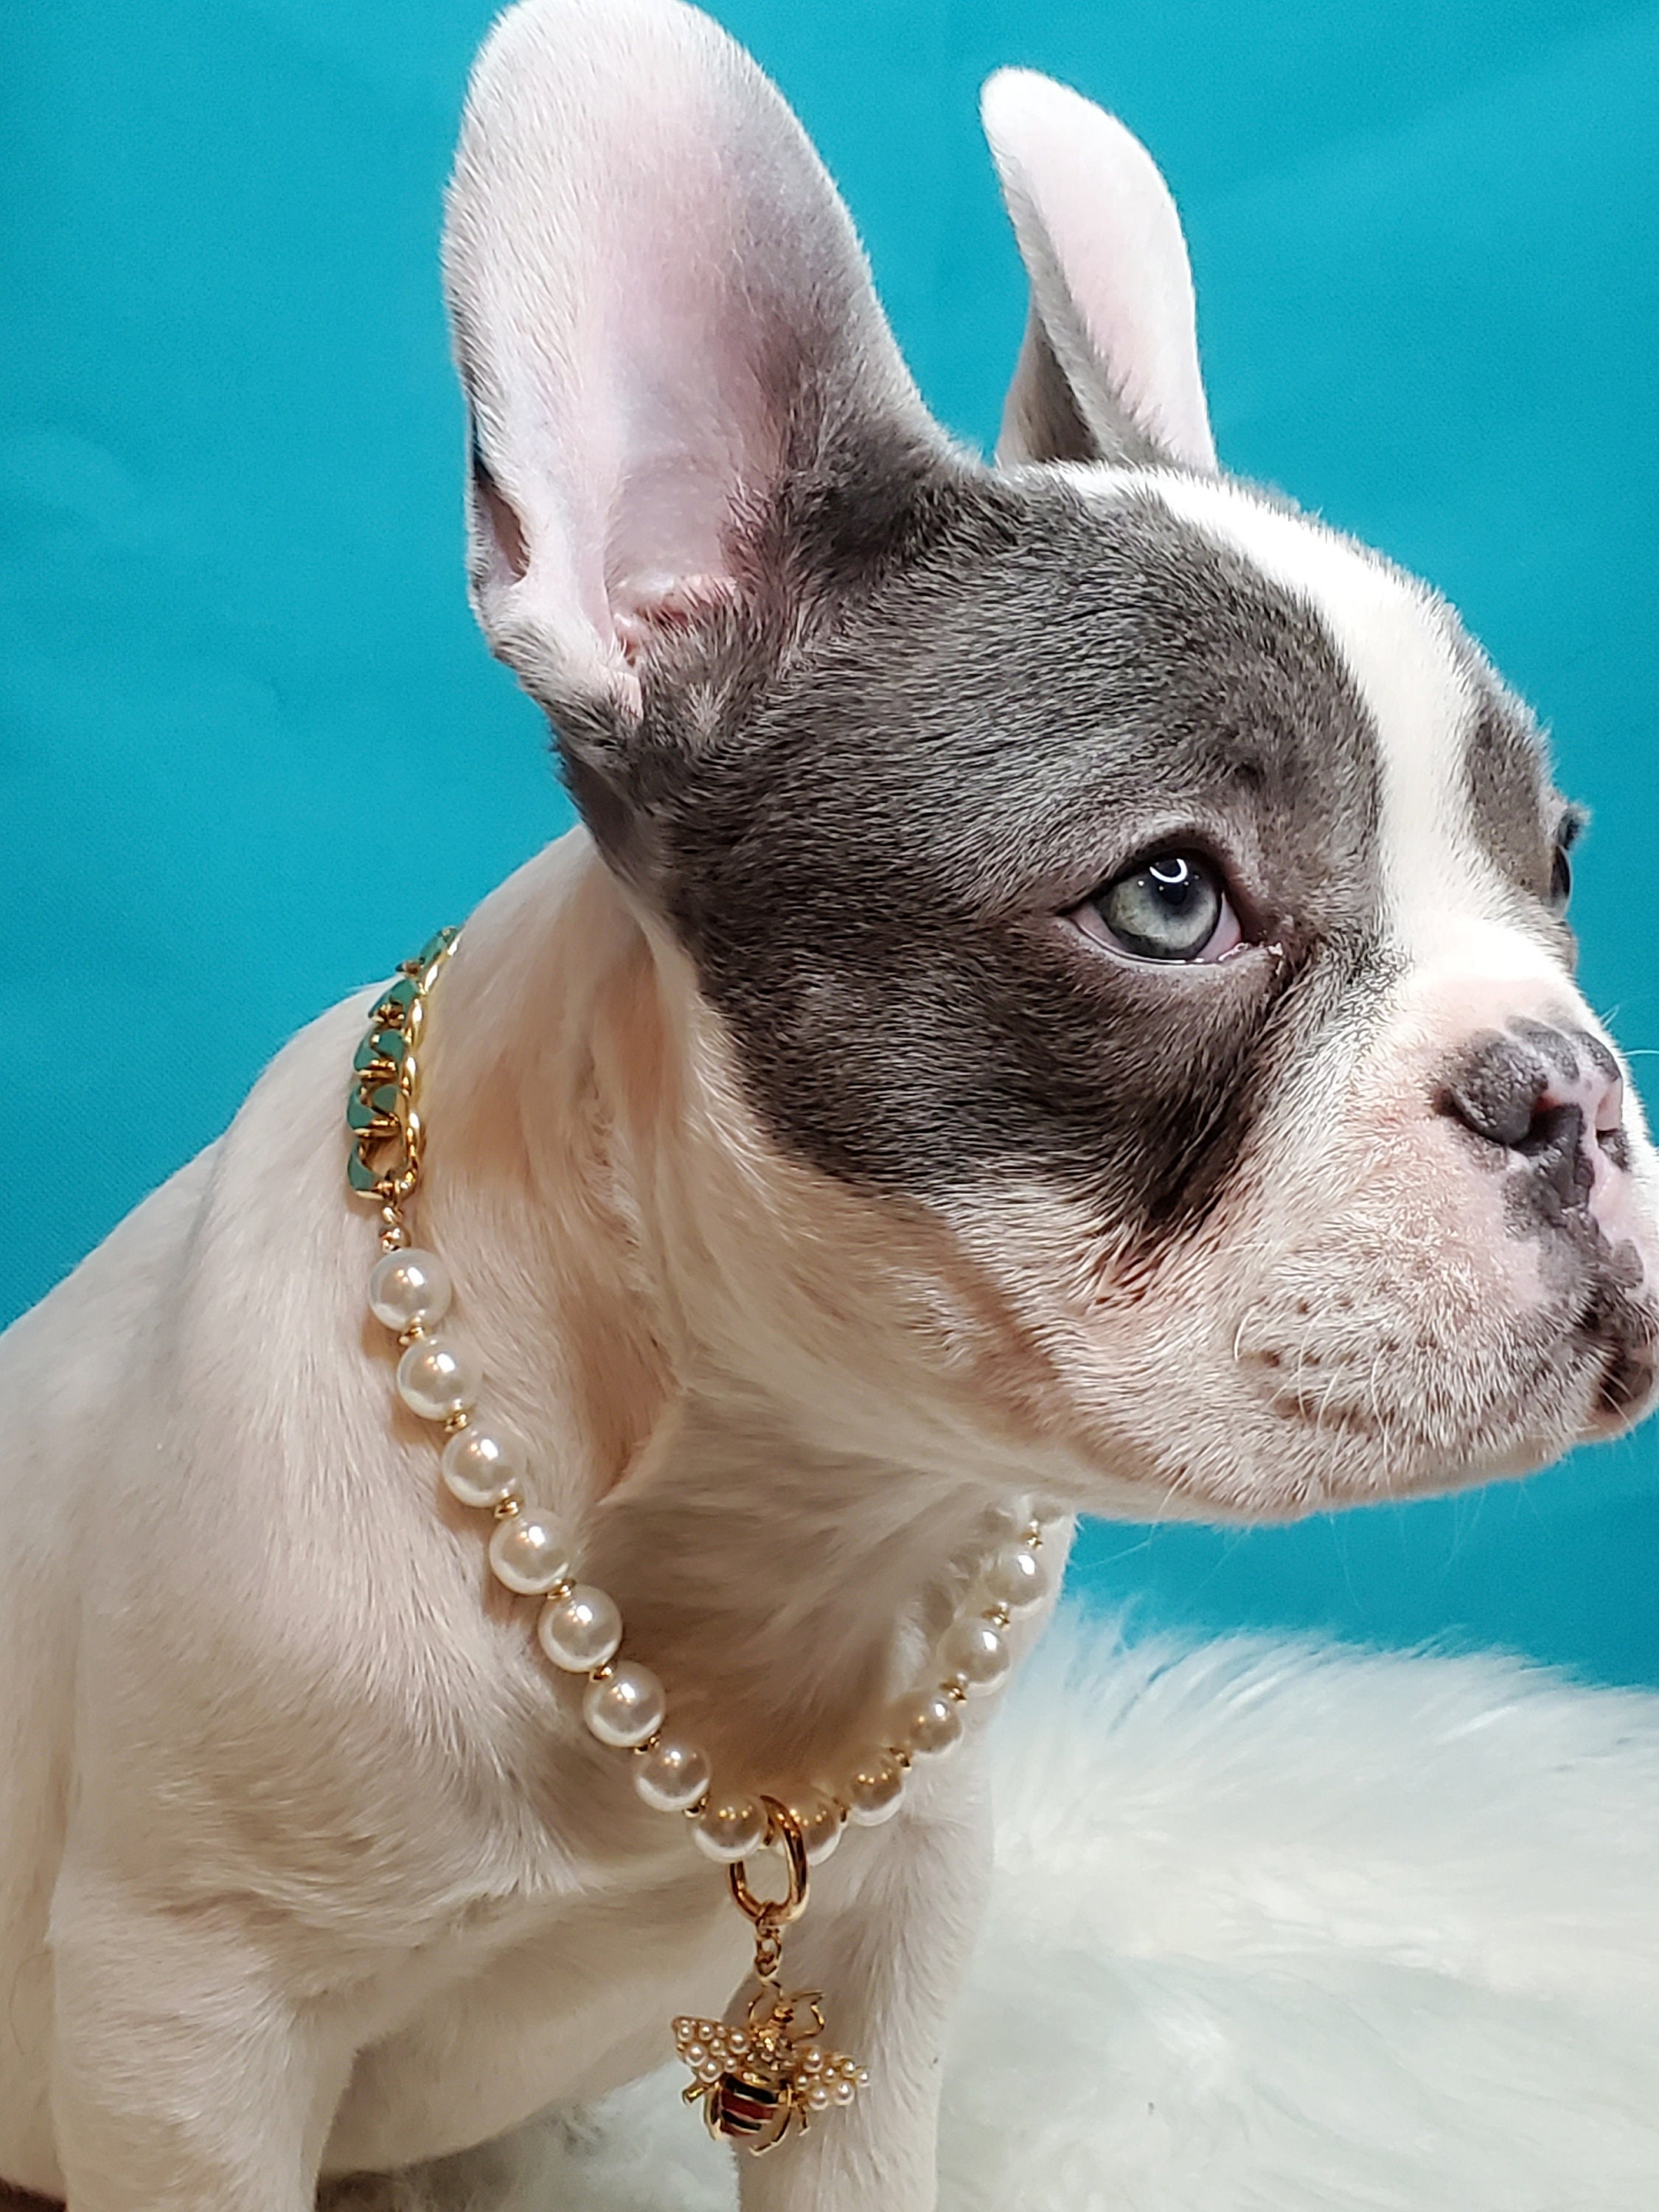 Supper Cute Dog Neck Chain Gold Color/pet Jewelry/ | Etsy